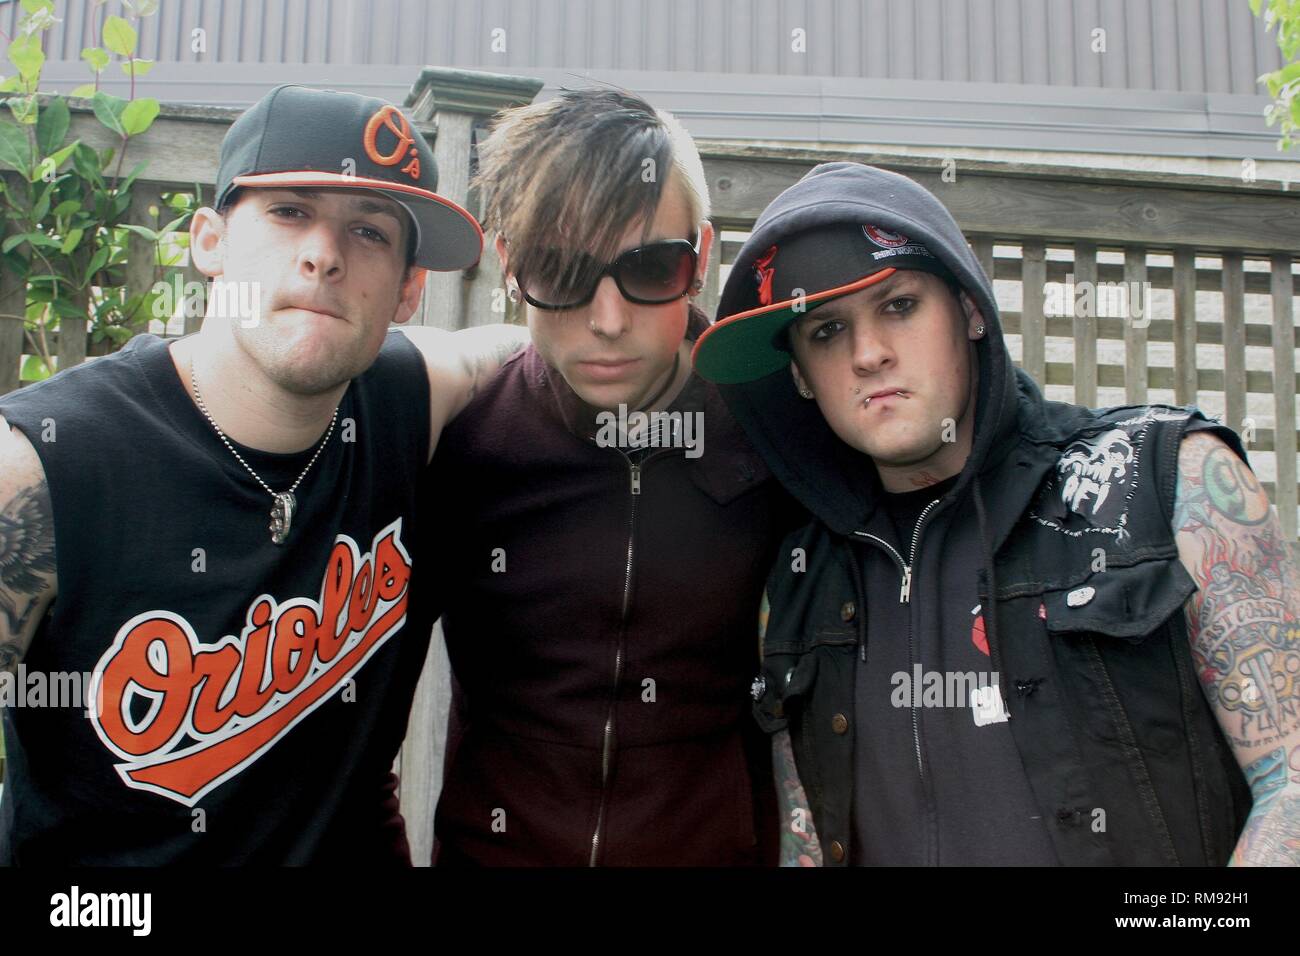 Good Charlotte band members are shown posing for a photo before their 'live' concert performance. Stock Photo